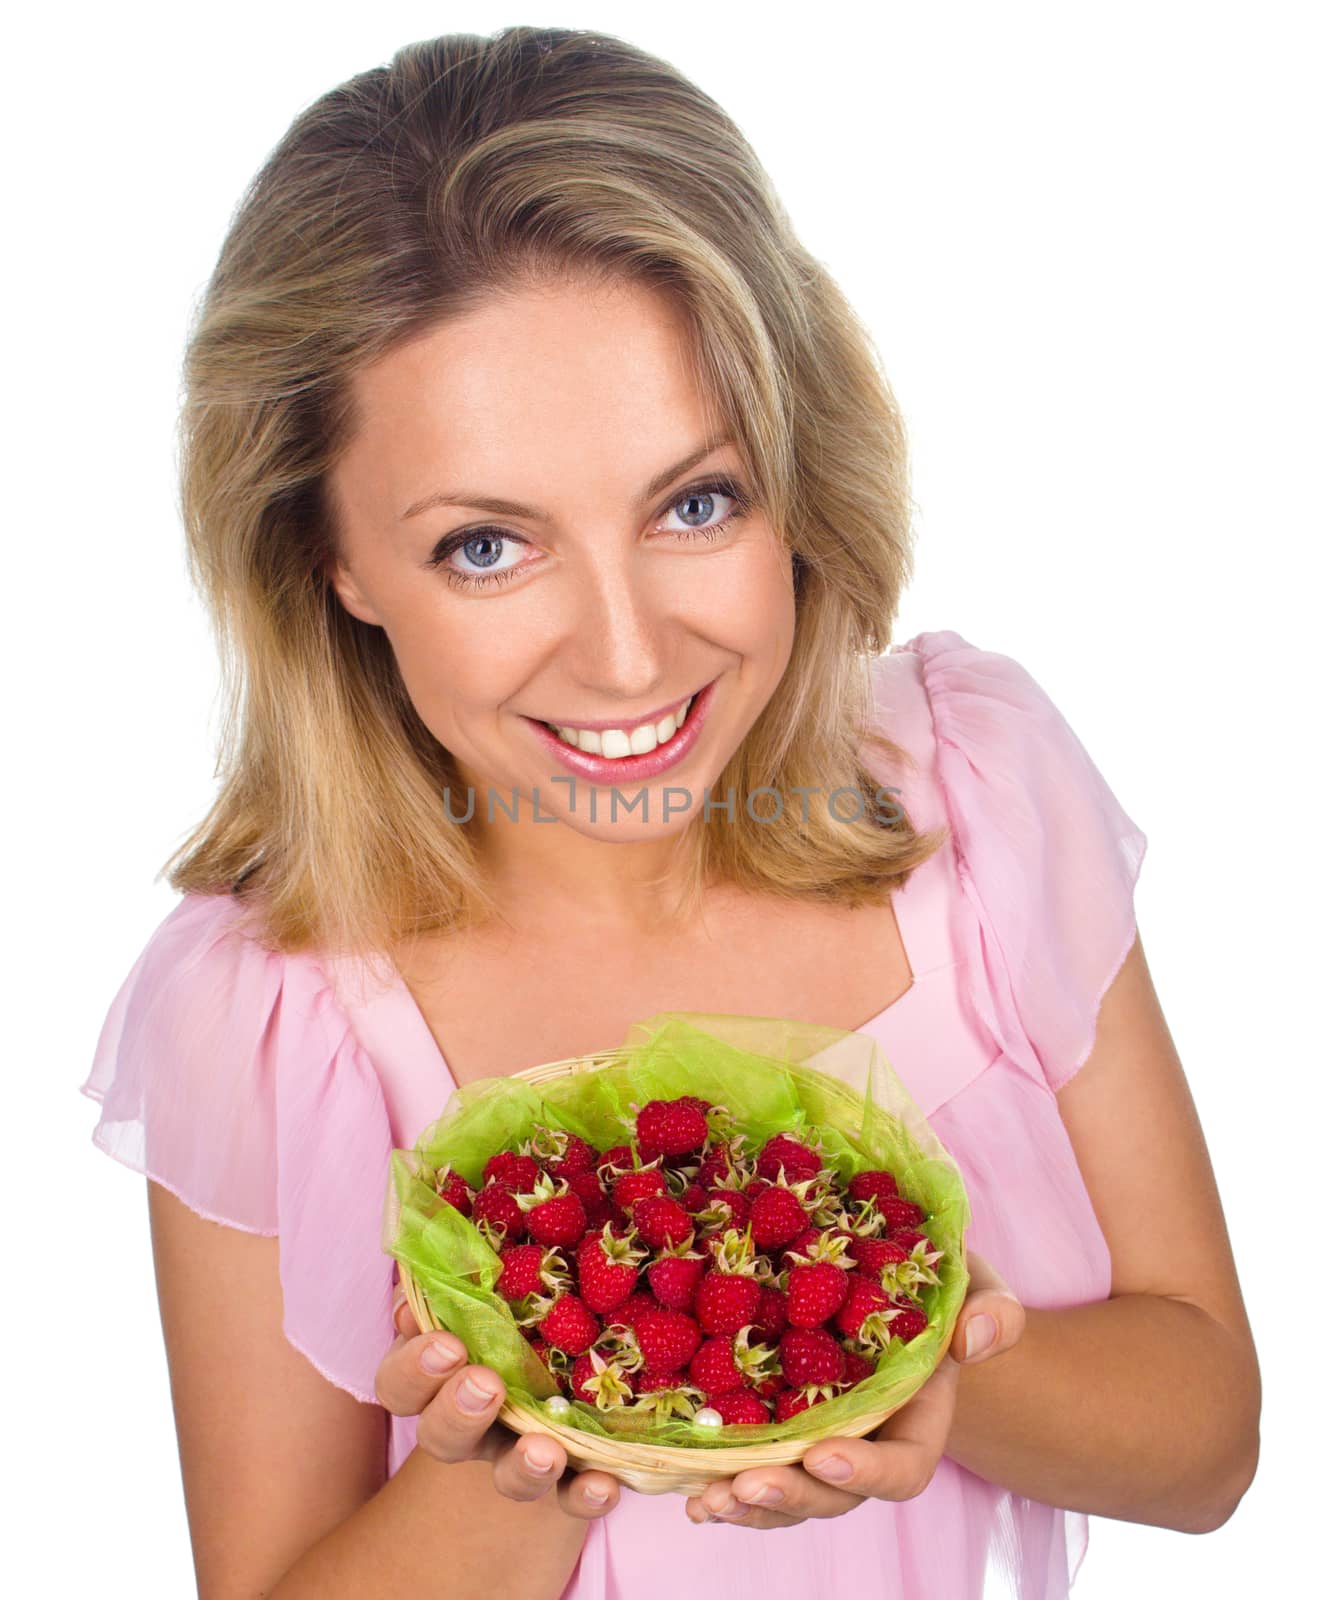 Close up of smiling woman holding raspberries by id7100